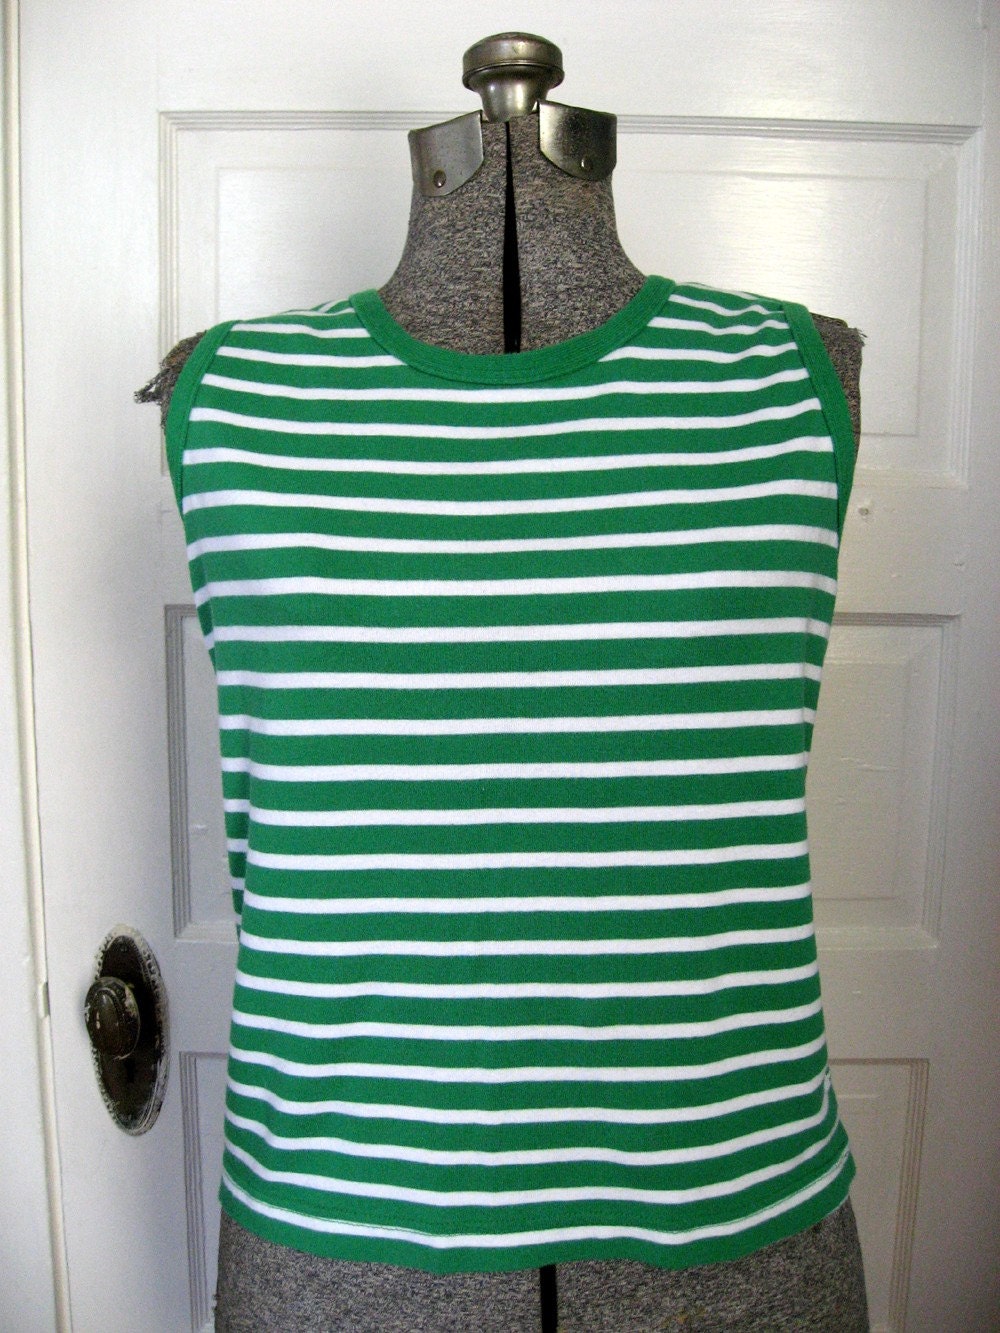 SALE vintage green and white striped cotton tank top s/m